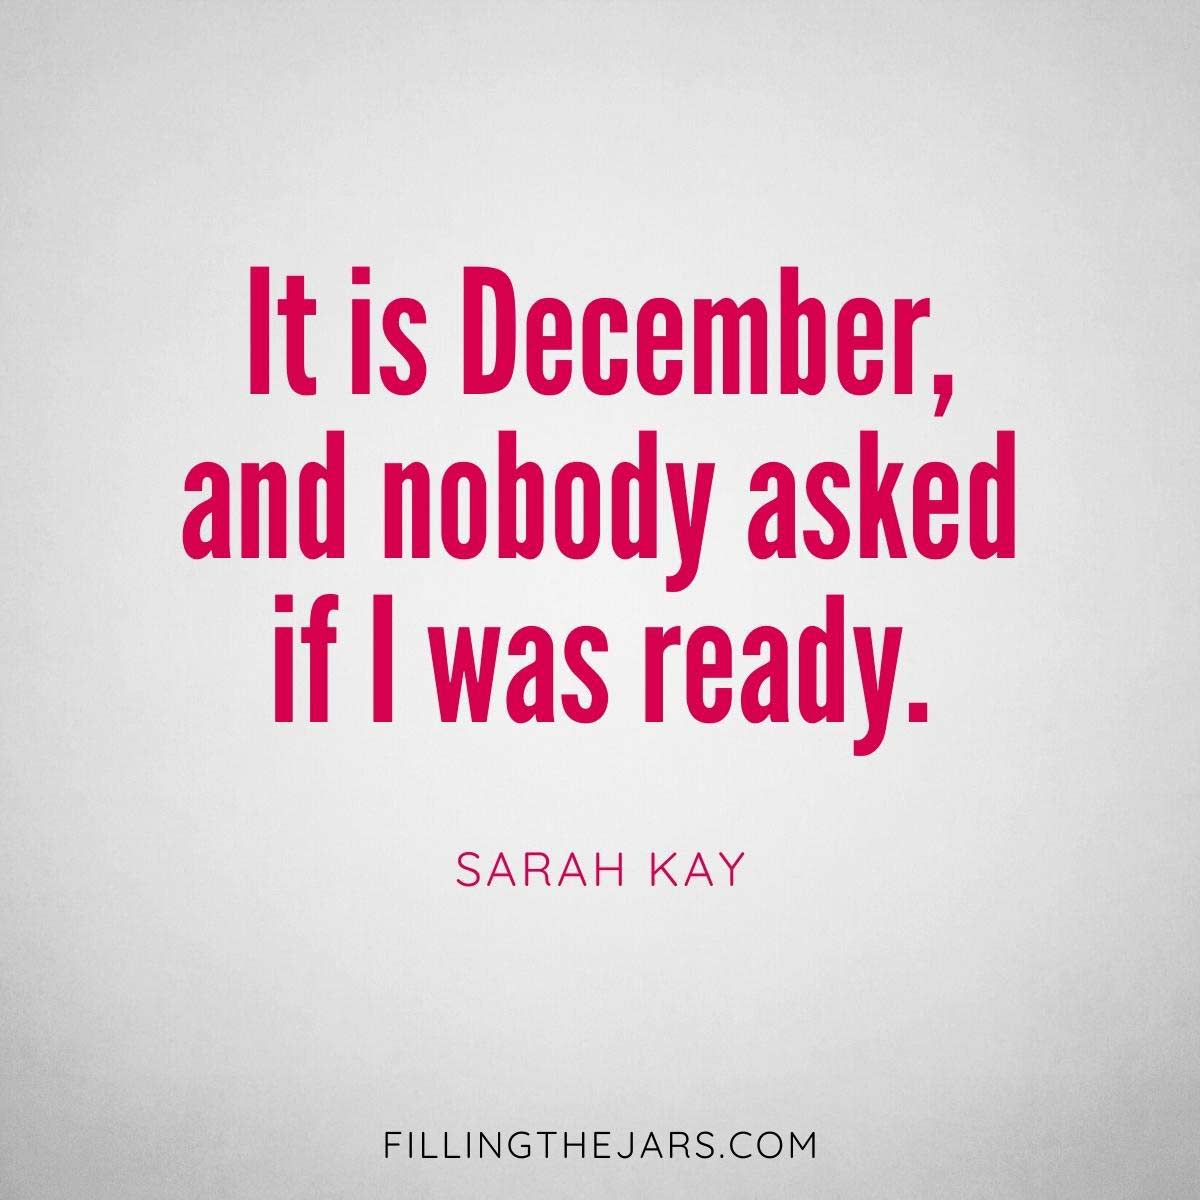 Sarah Kay December quote nobody asked if I was ready in dark pink text on gray and white background.